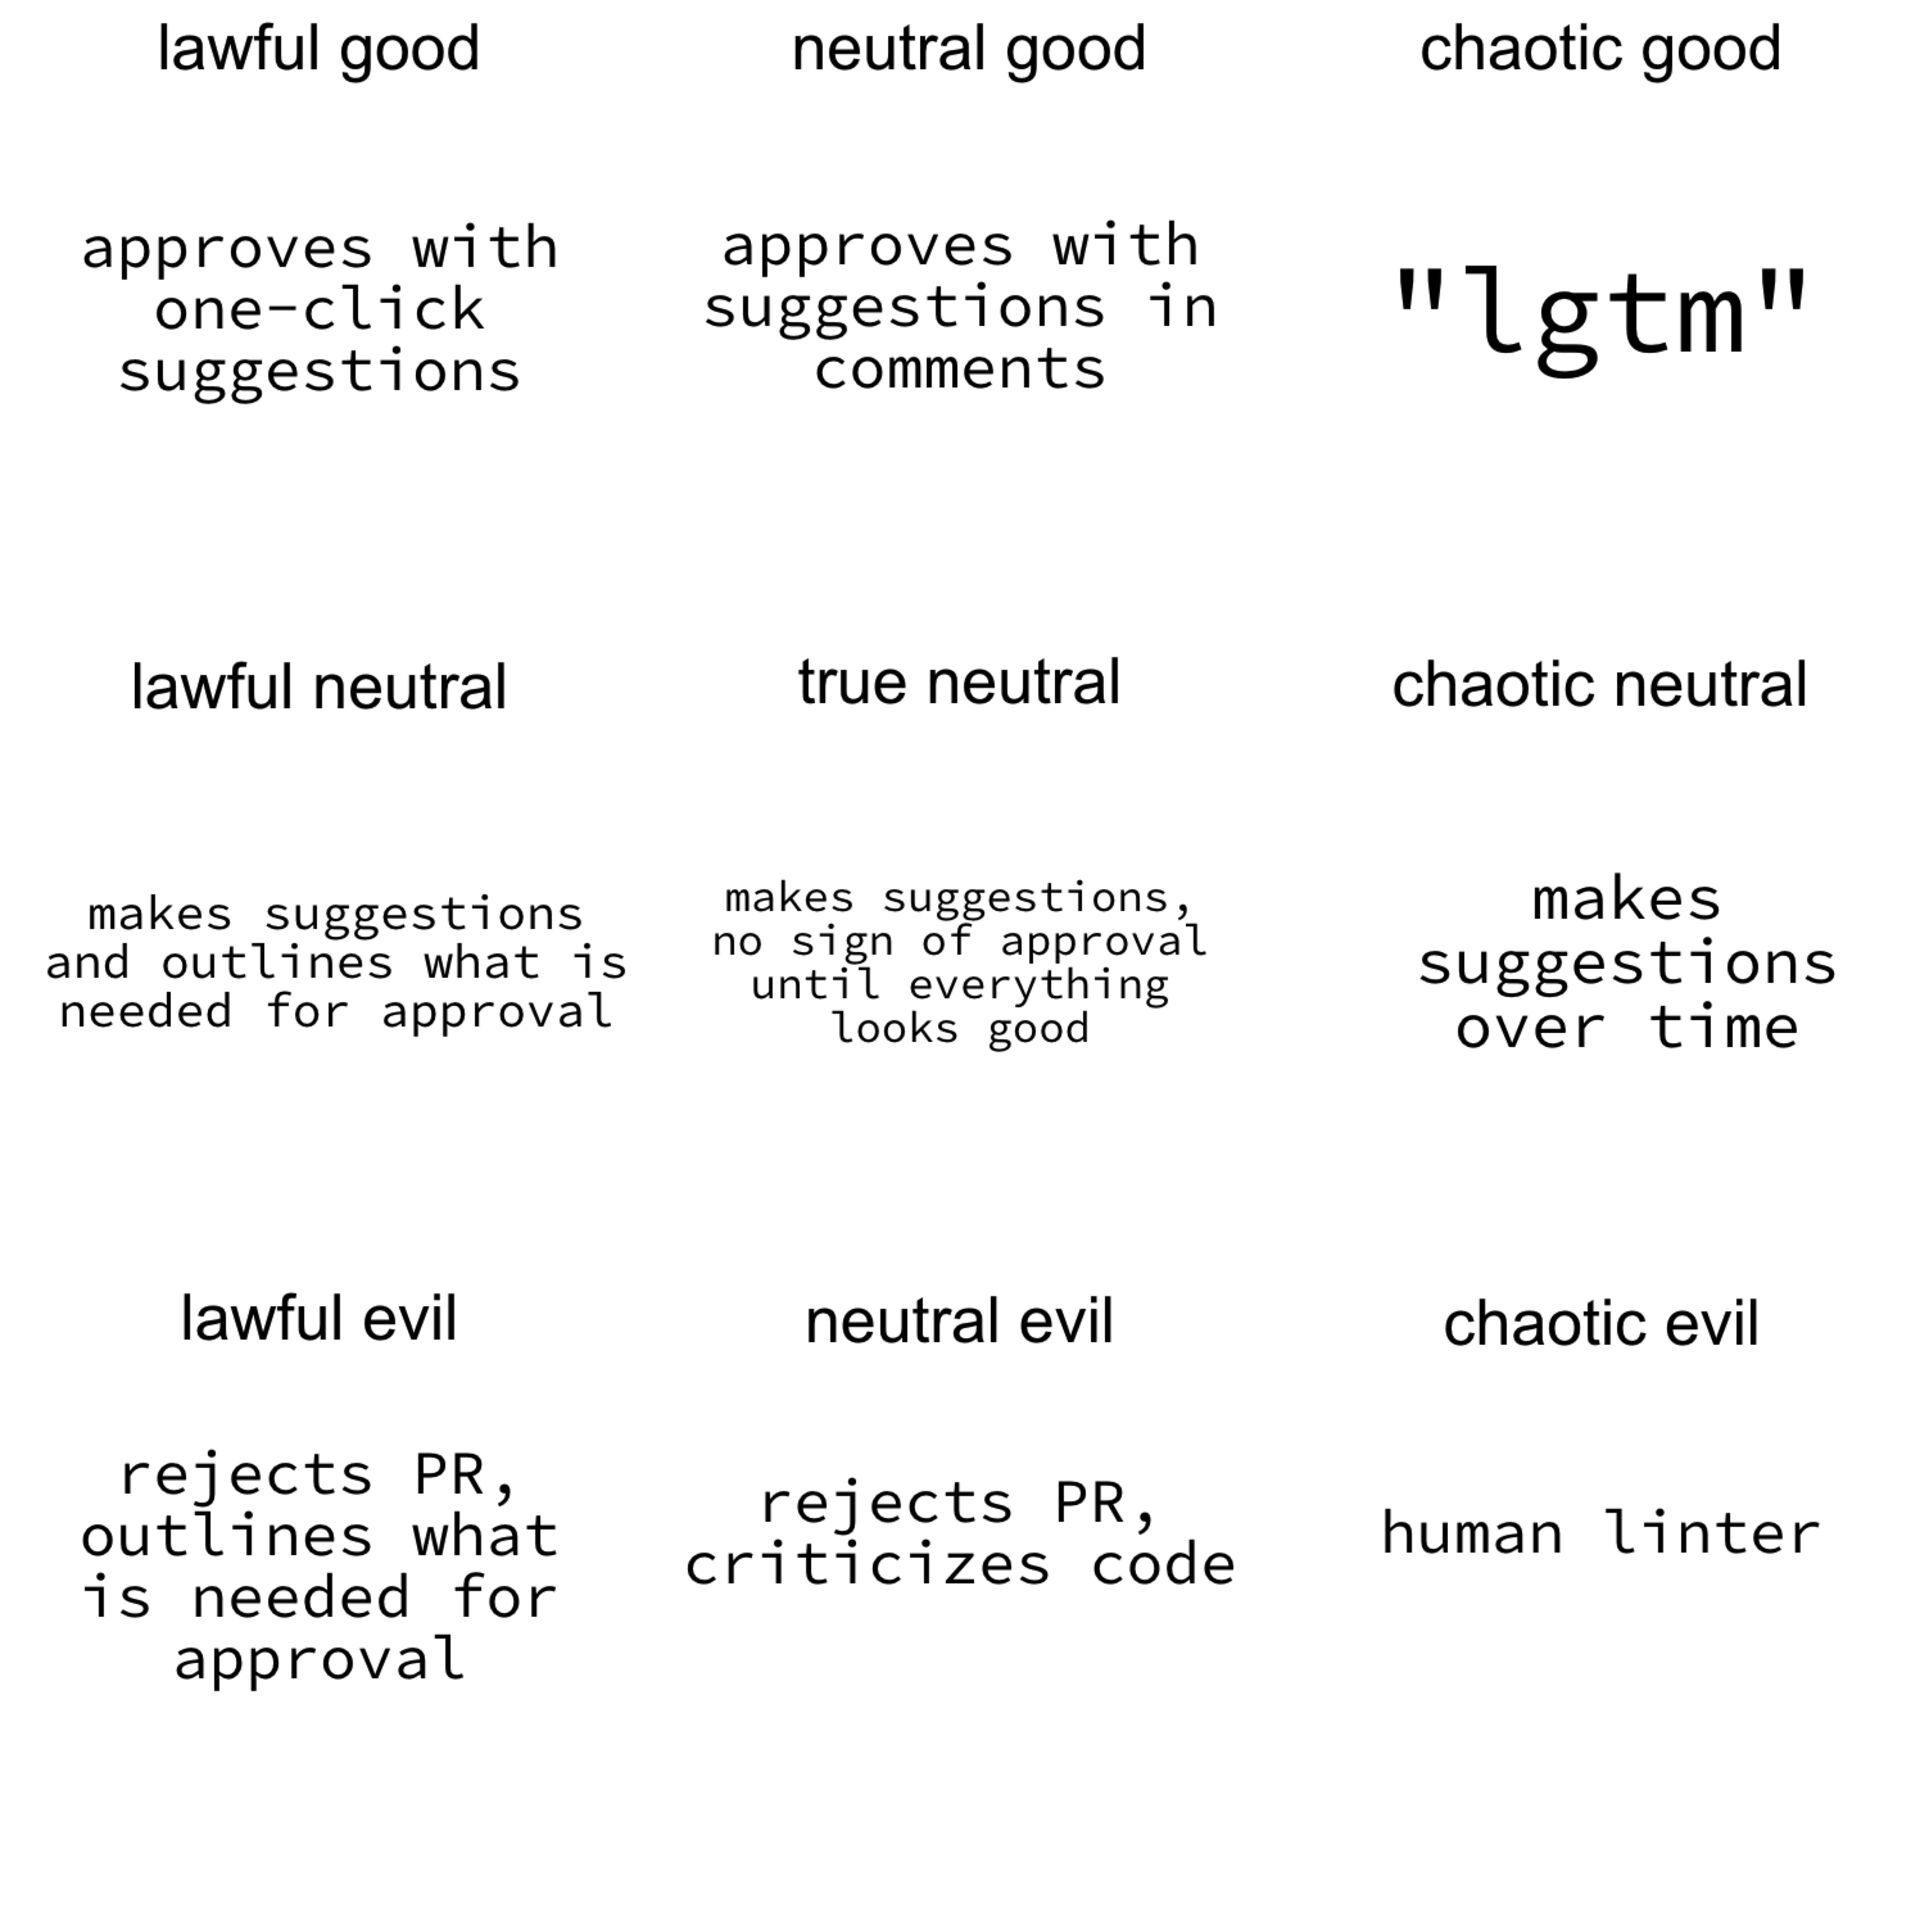 Dungeons & Dragons-style alignment chart for responding to PRs, from @davidkpiano